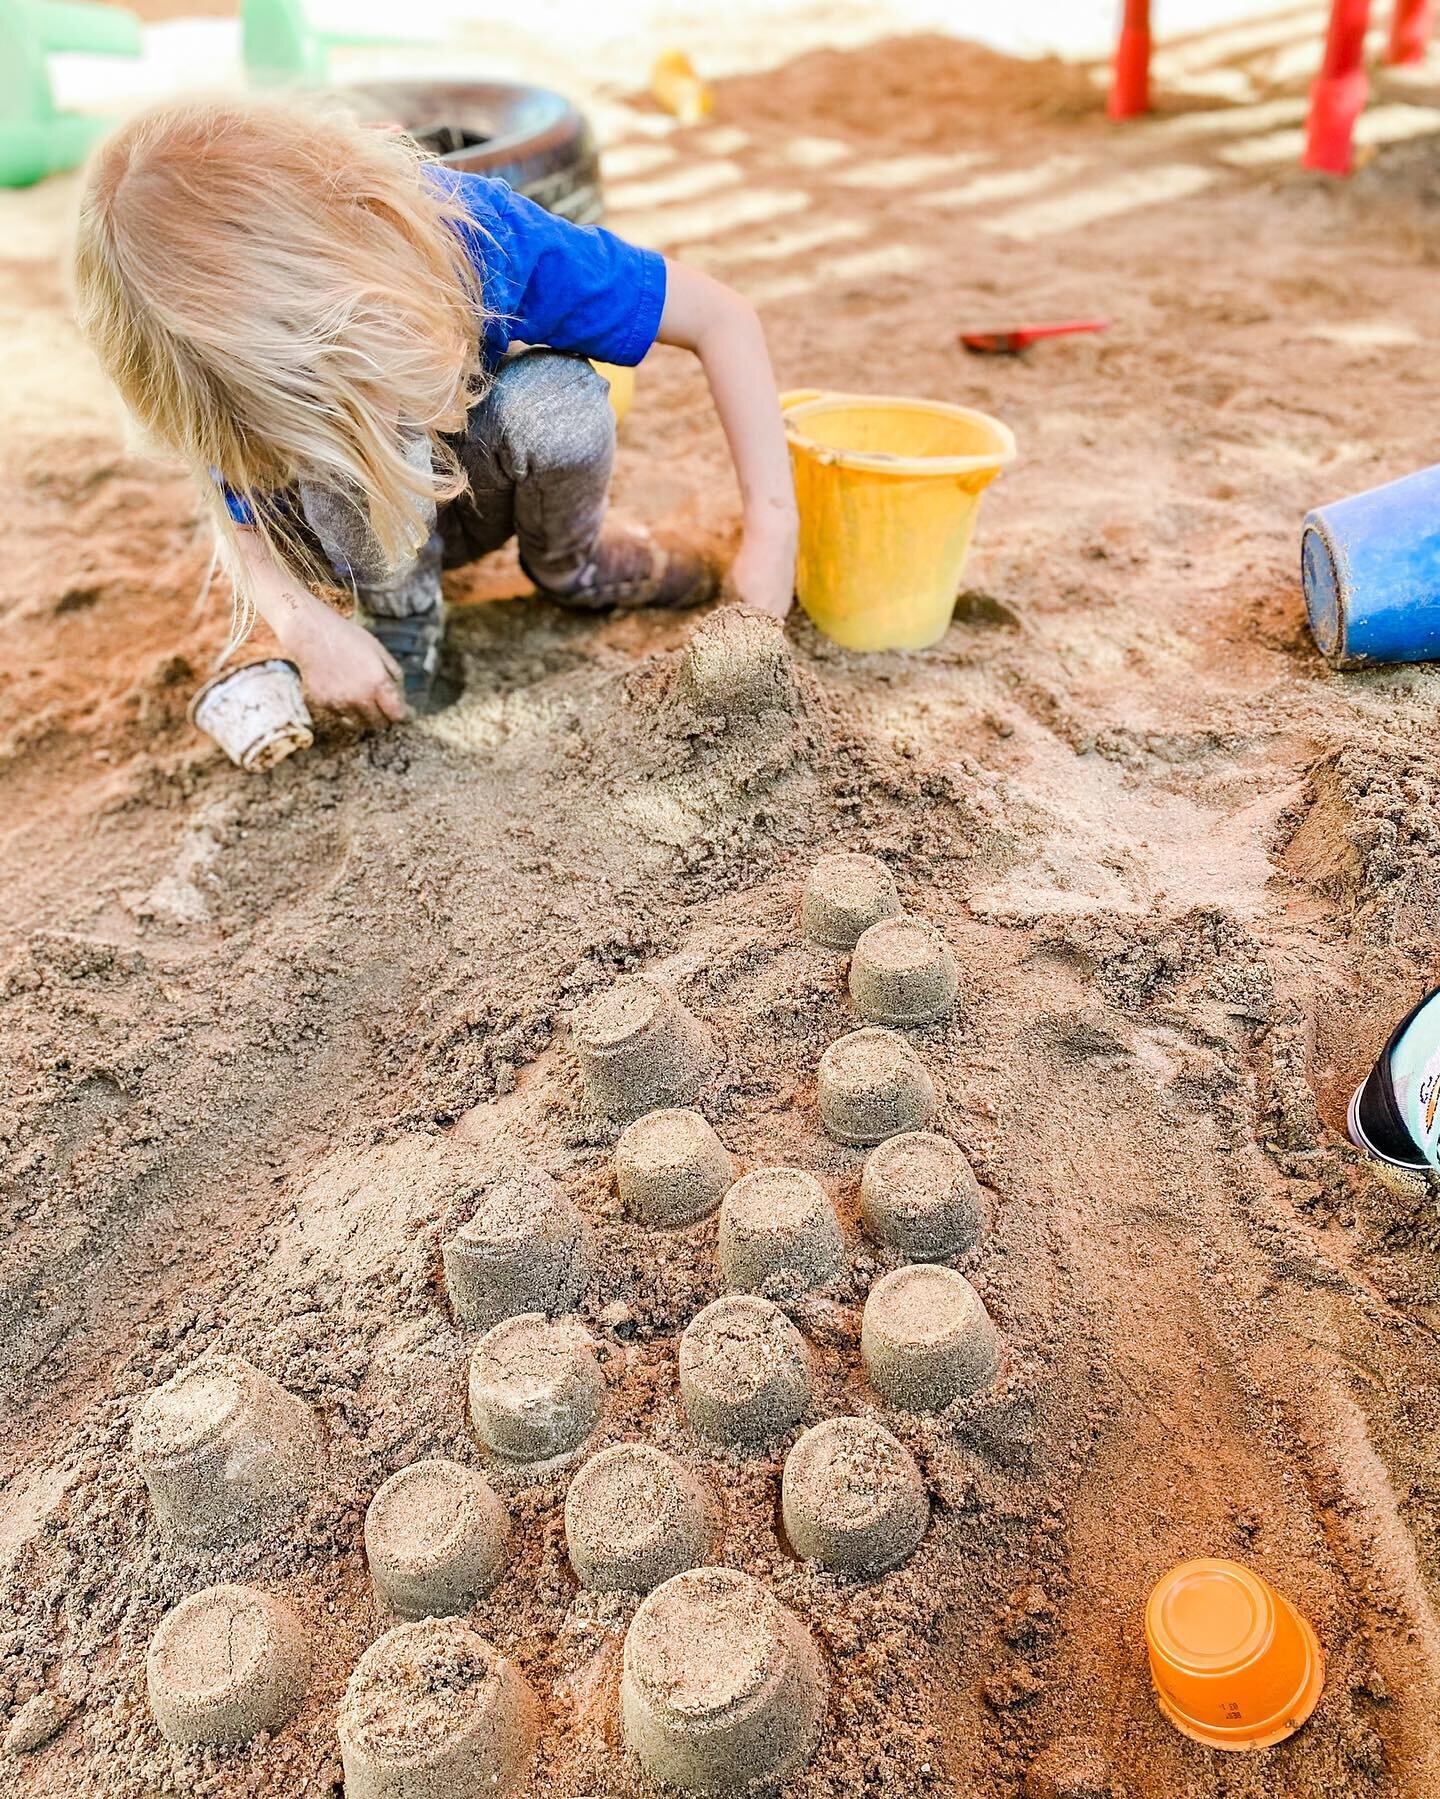 Do you recognize this sand town? Leave your guesses below. 👇

Image Description: A student is crouched building figures in the sandbox. There is a yellow bucket beside them and sun in the background.

#preschool #preschoolActivities #EarlyChildhoodE